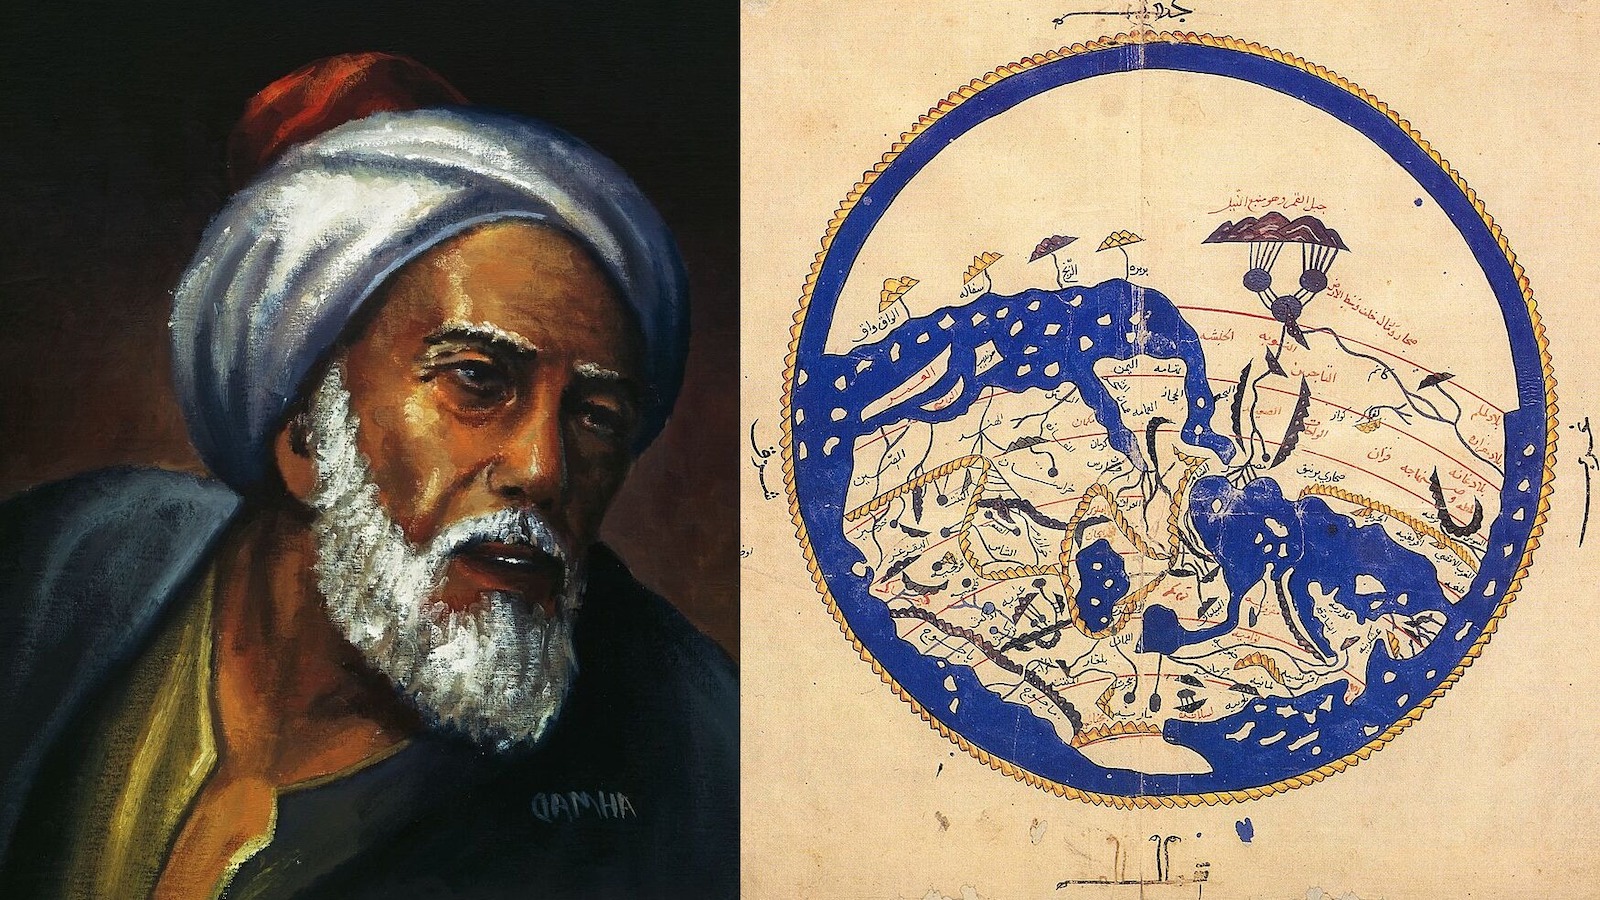 A painting of a man with a turban and a map.